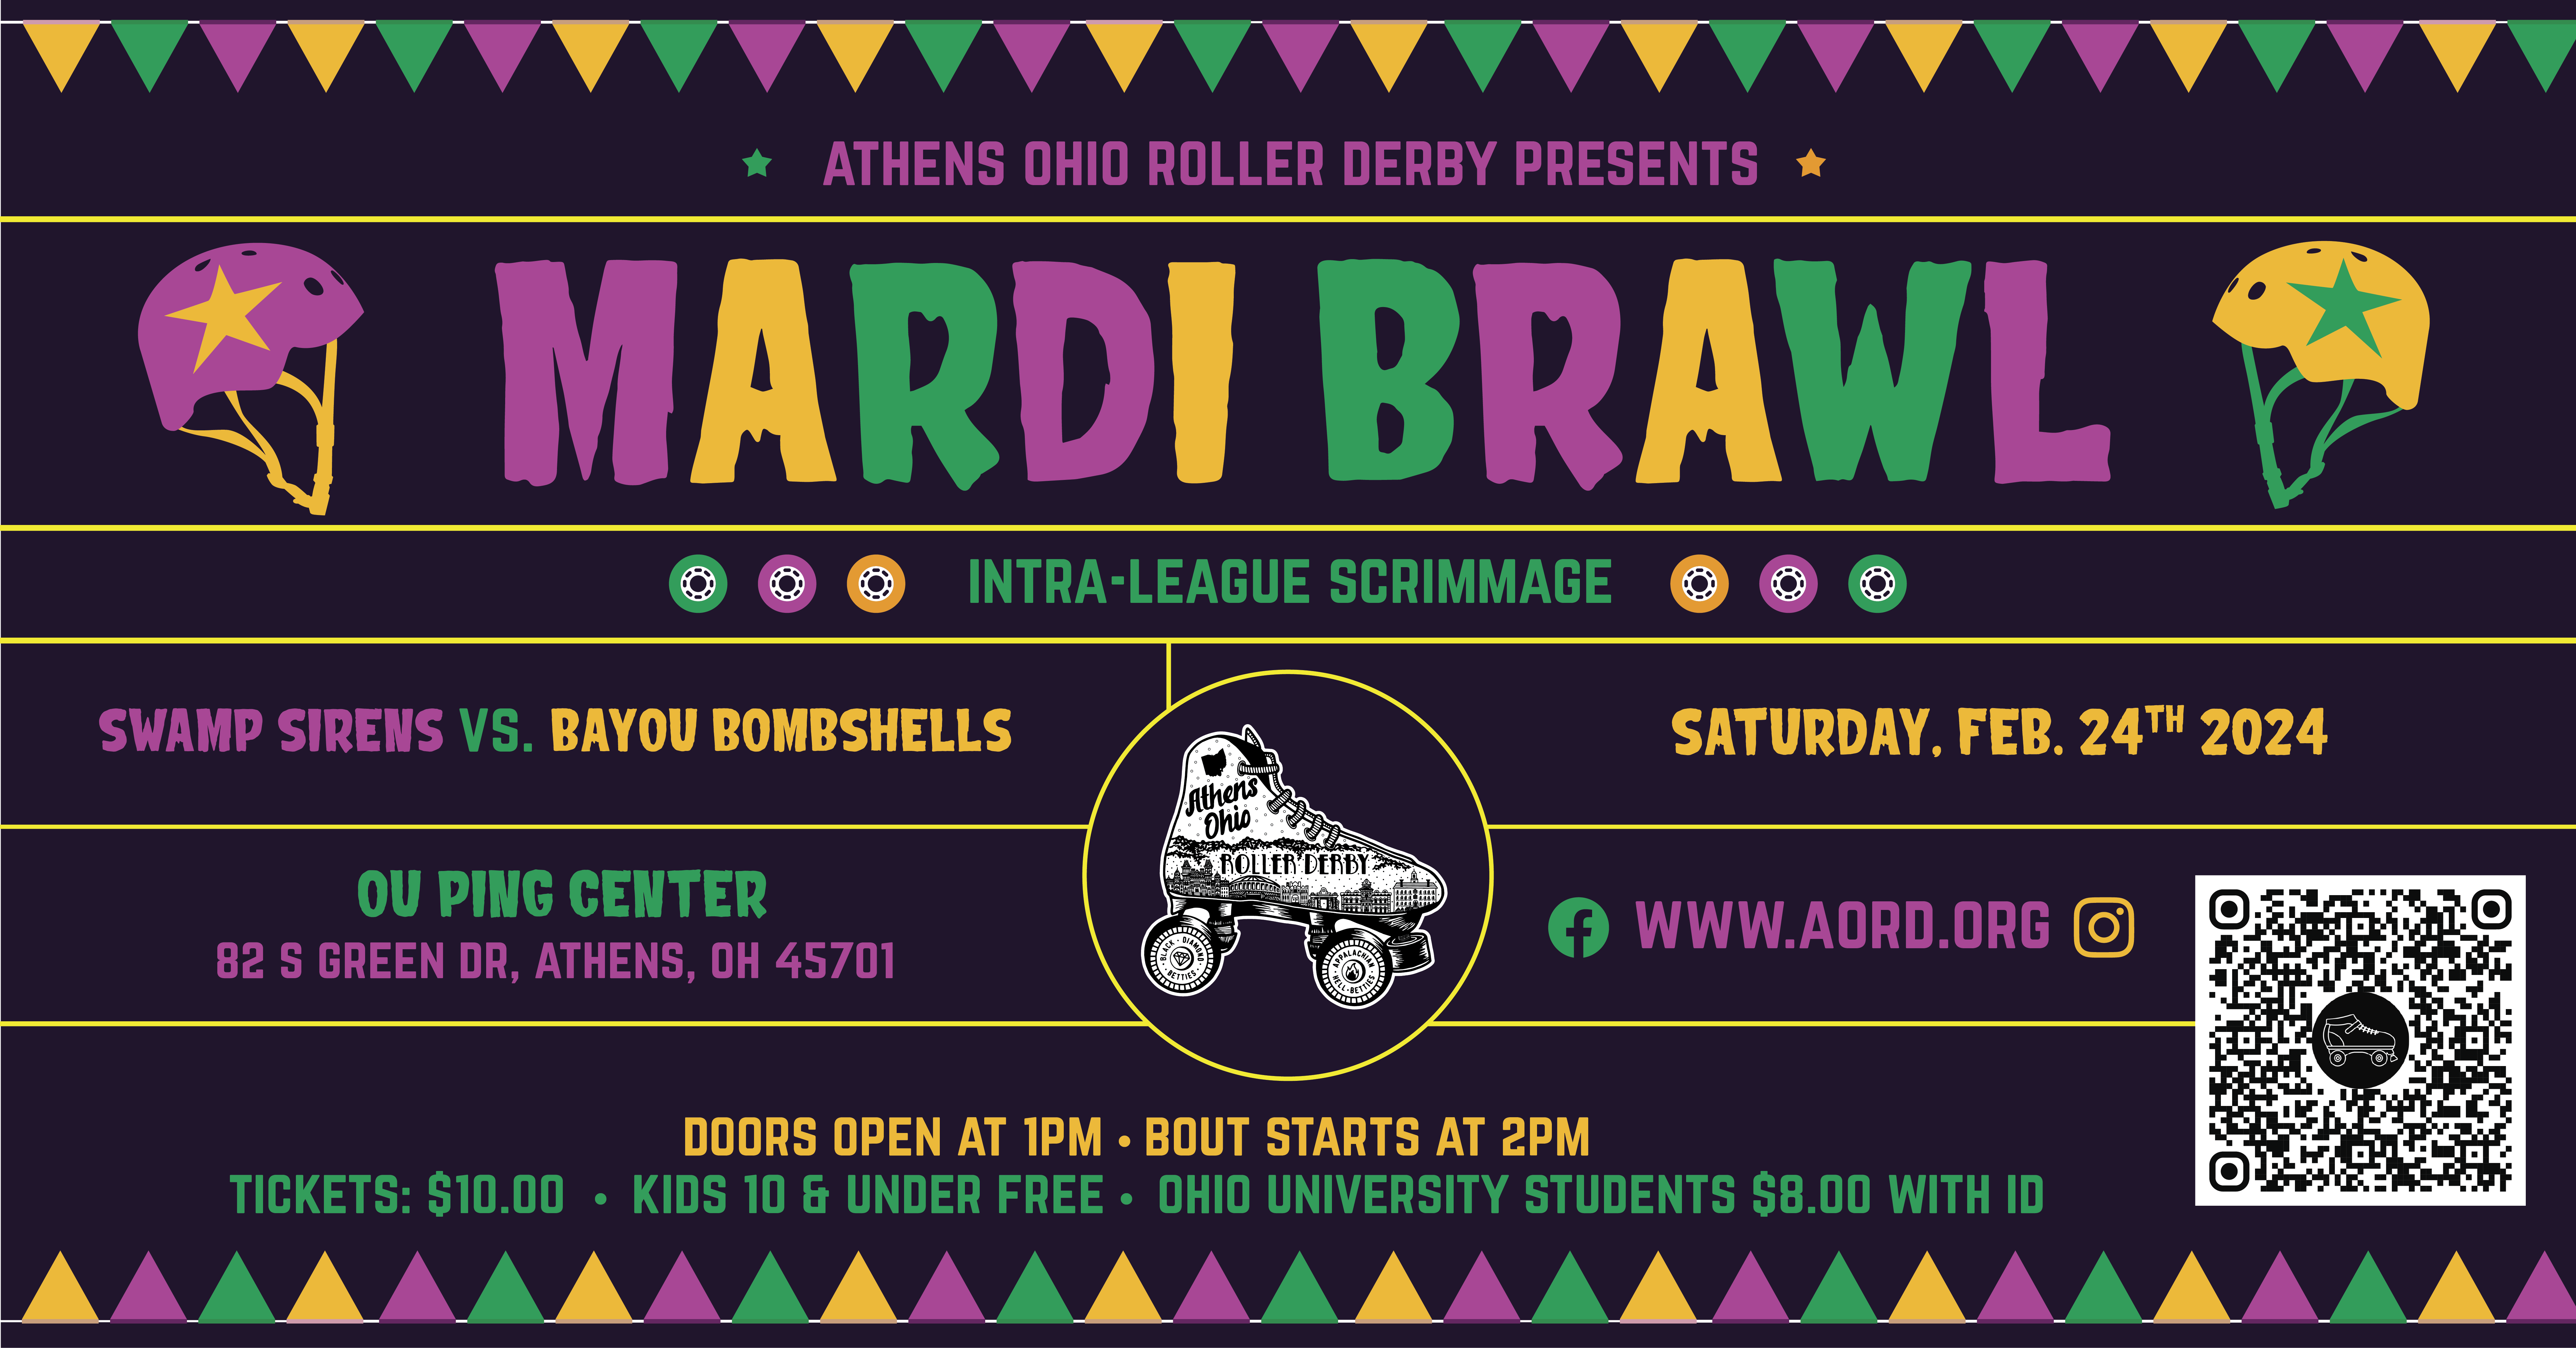 An image promoting the Athens Roller Derby's Mardi Brawl